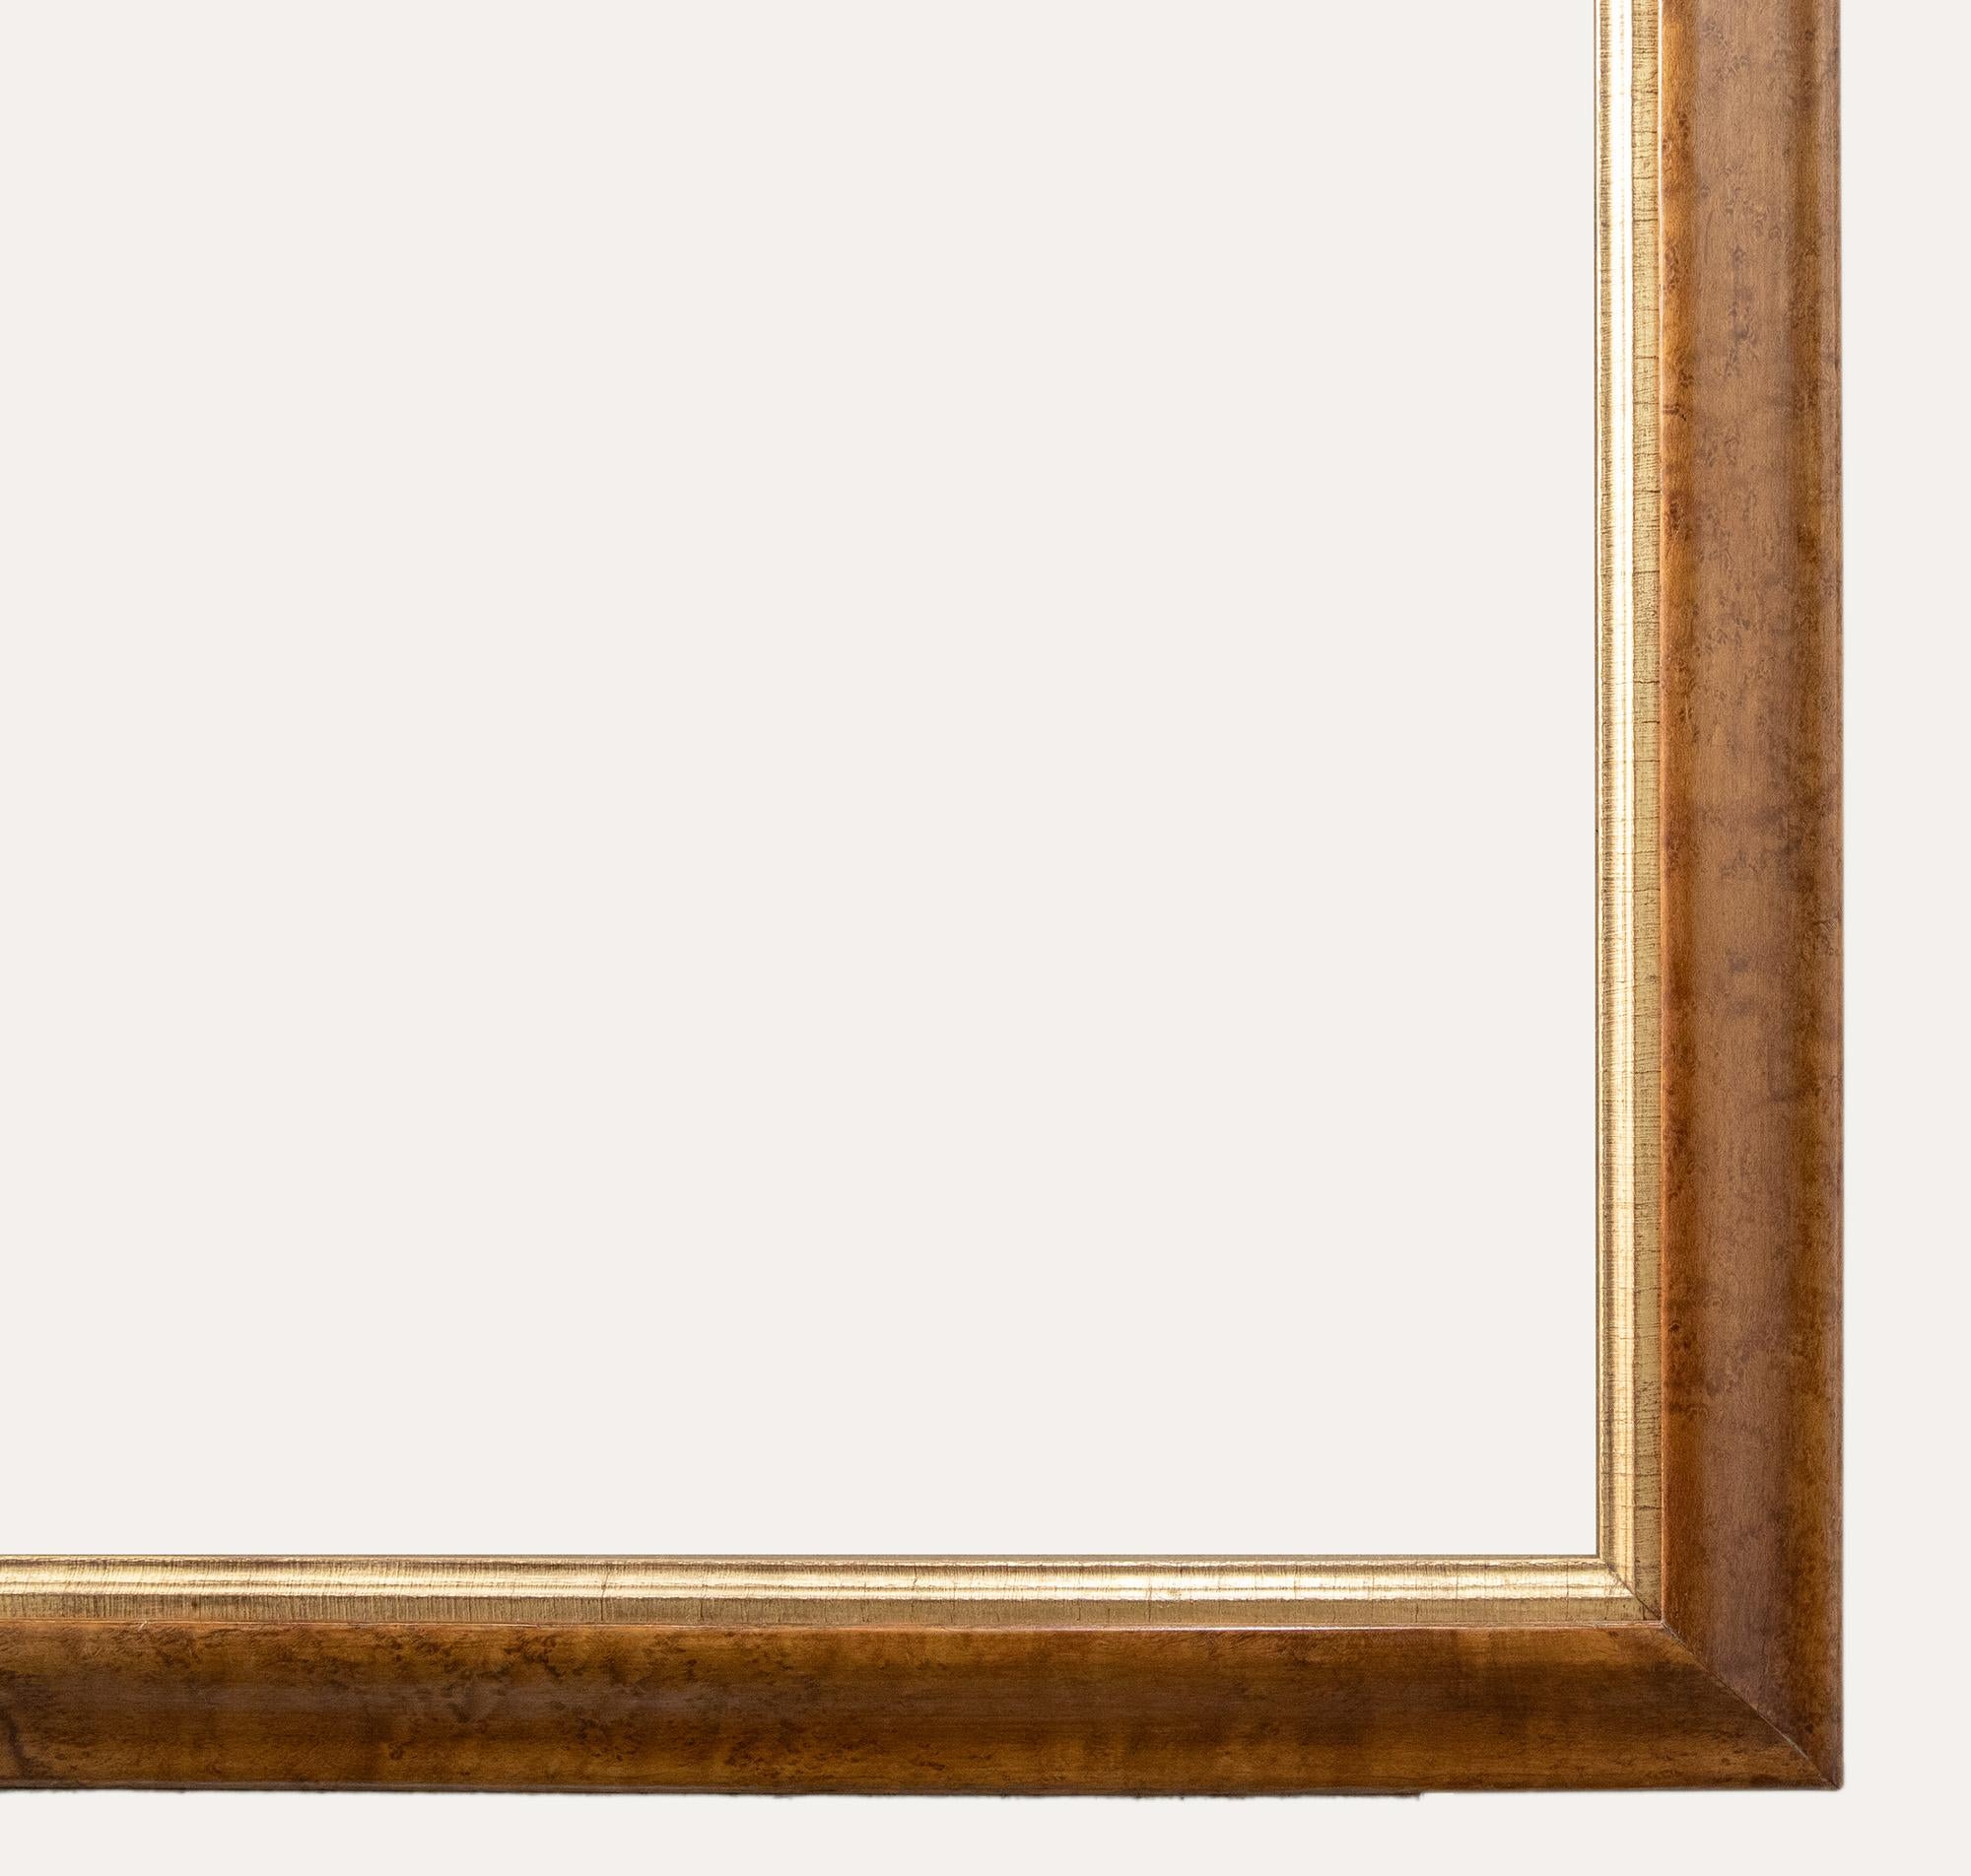 A beautiful frame of large proportions. Crafted from bird's eye maple. The wood has excellent surface colour. Complete with internal slip and glazing. Measurements:Inner window: 64 cm x 77.5 cmOuter frame size: 77.5cm x 91.5 cmRebate: 68.5 cm x 82.5